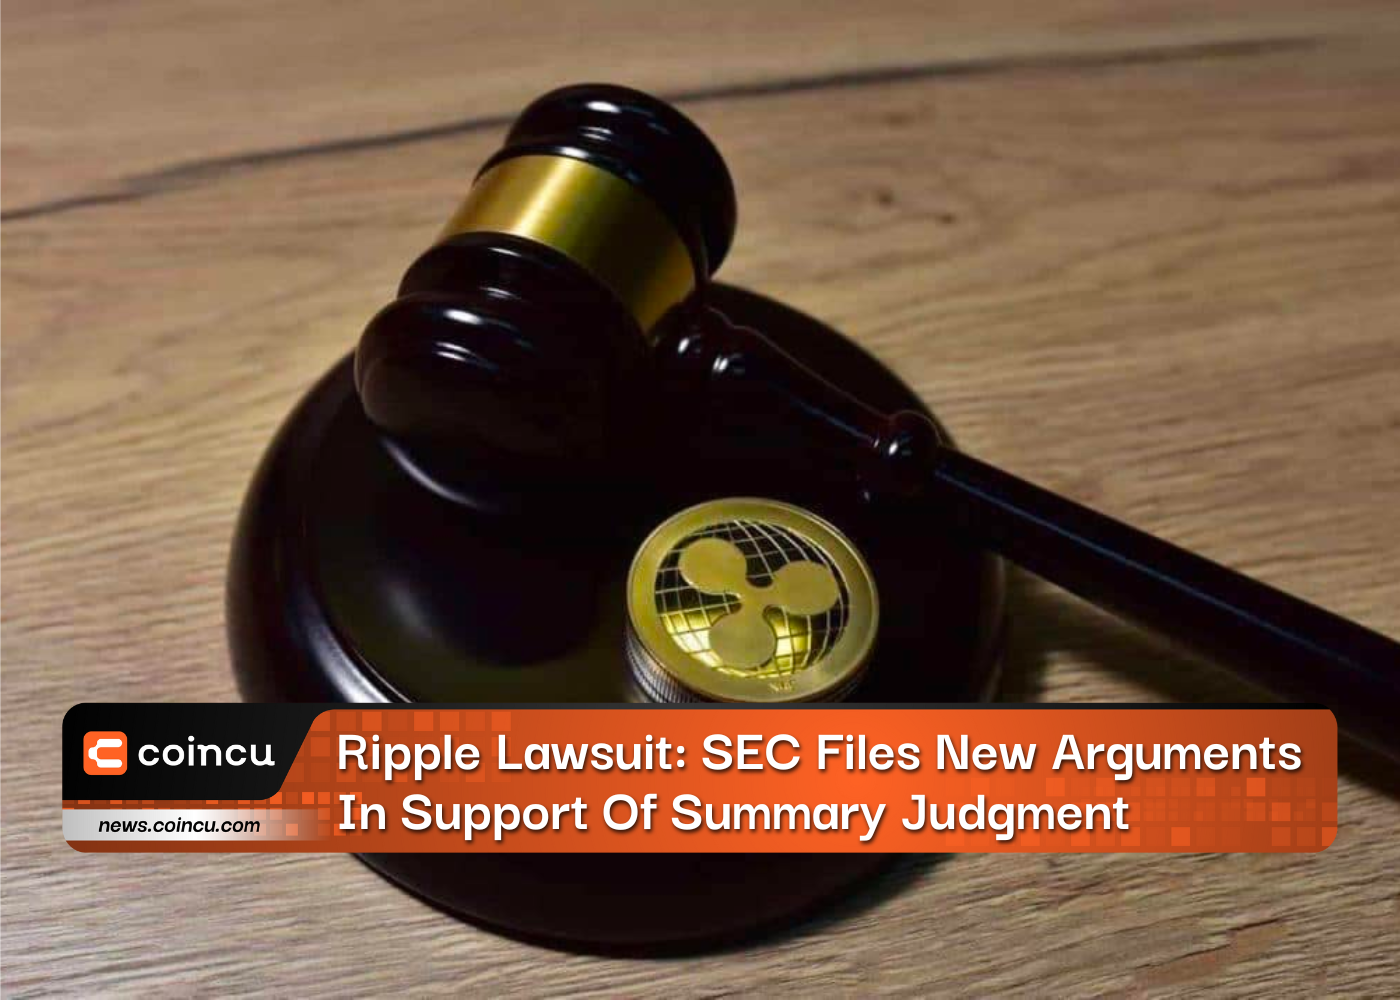 Ripple Lawsuit: SEC Files New Arguments In Support Of Summary Judgment